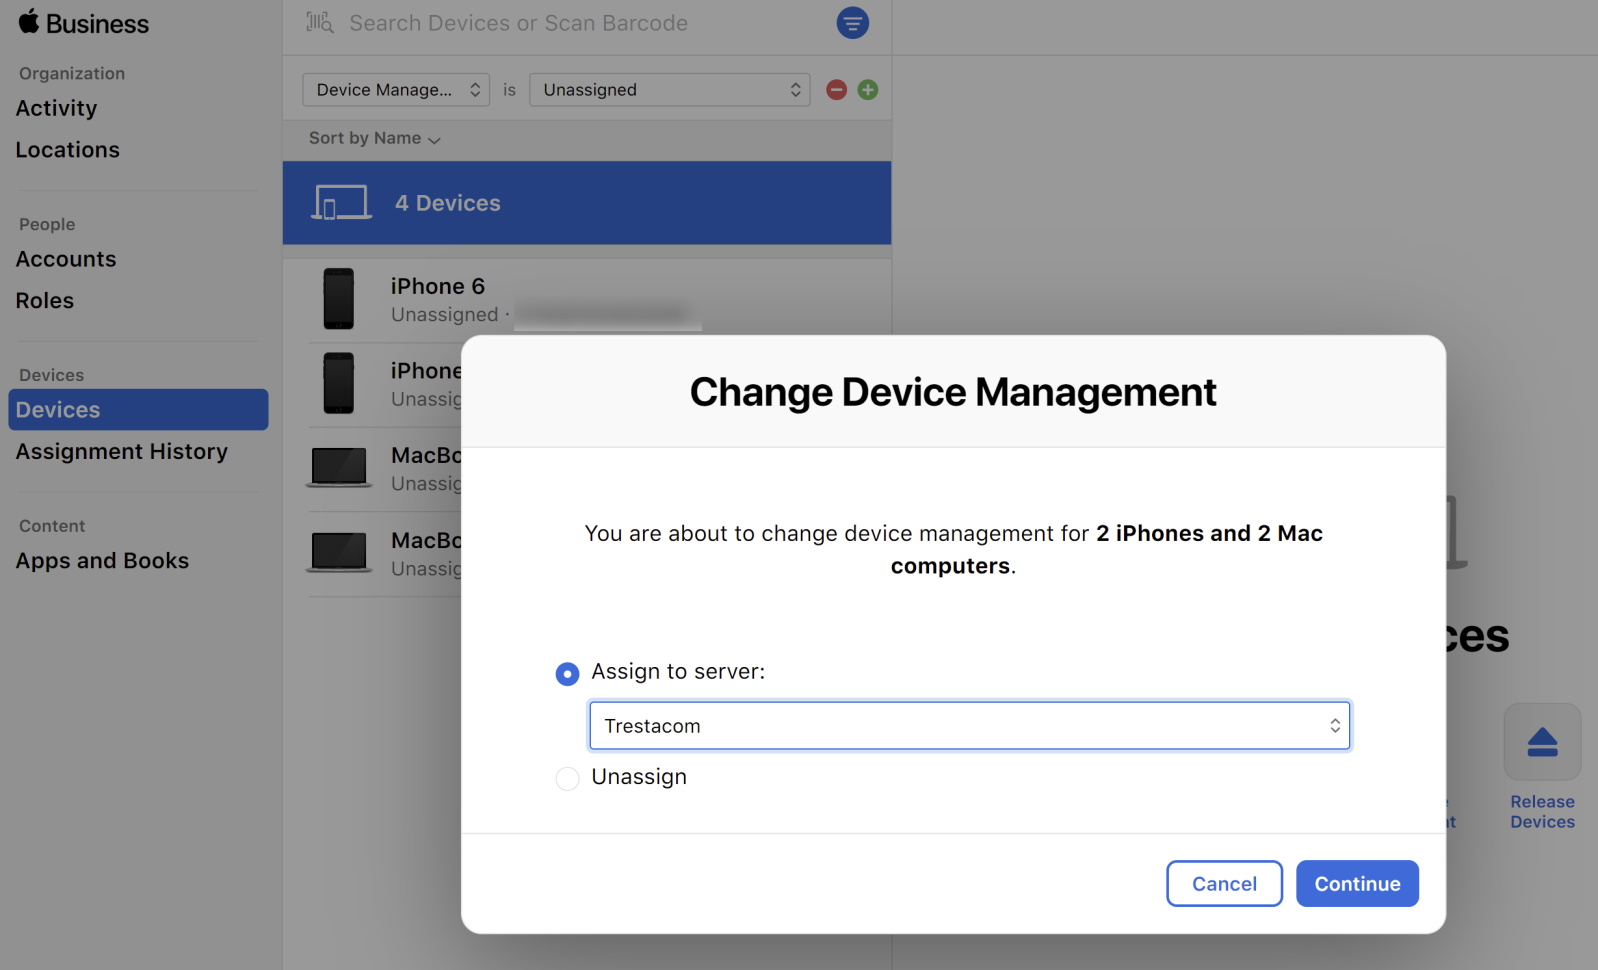 How to assign devices to an MDM server in Apple Business or School Manager using the Change Device Management option.